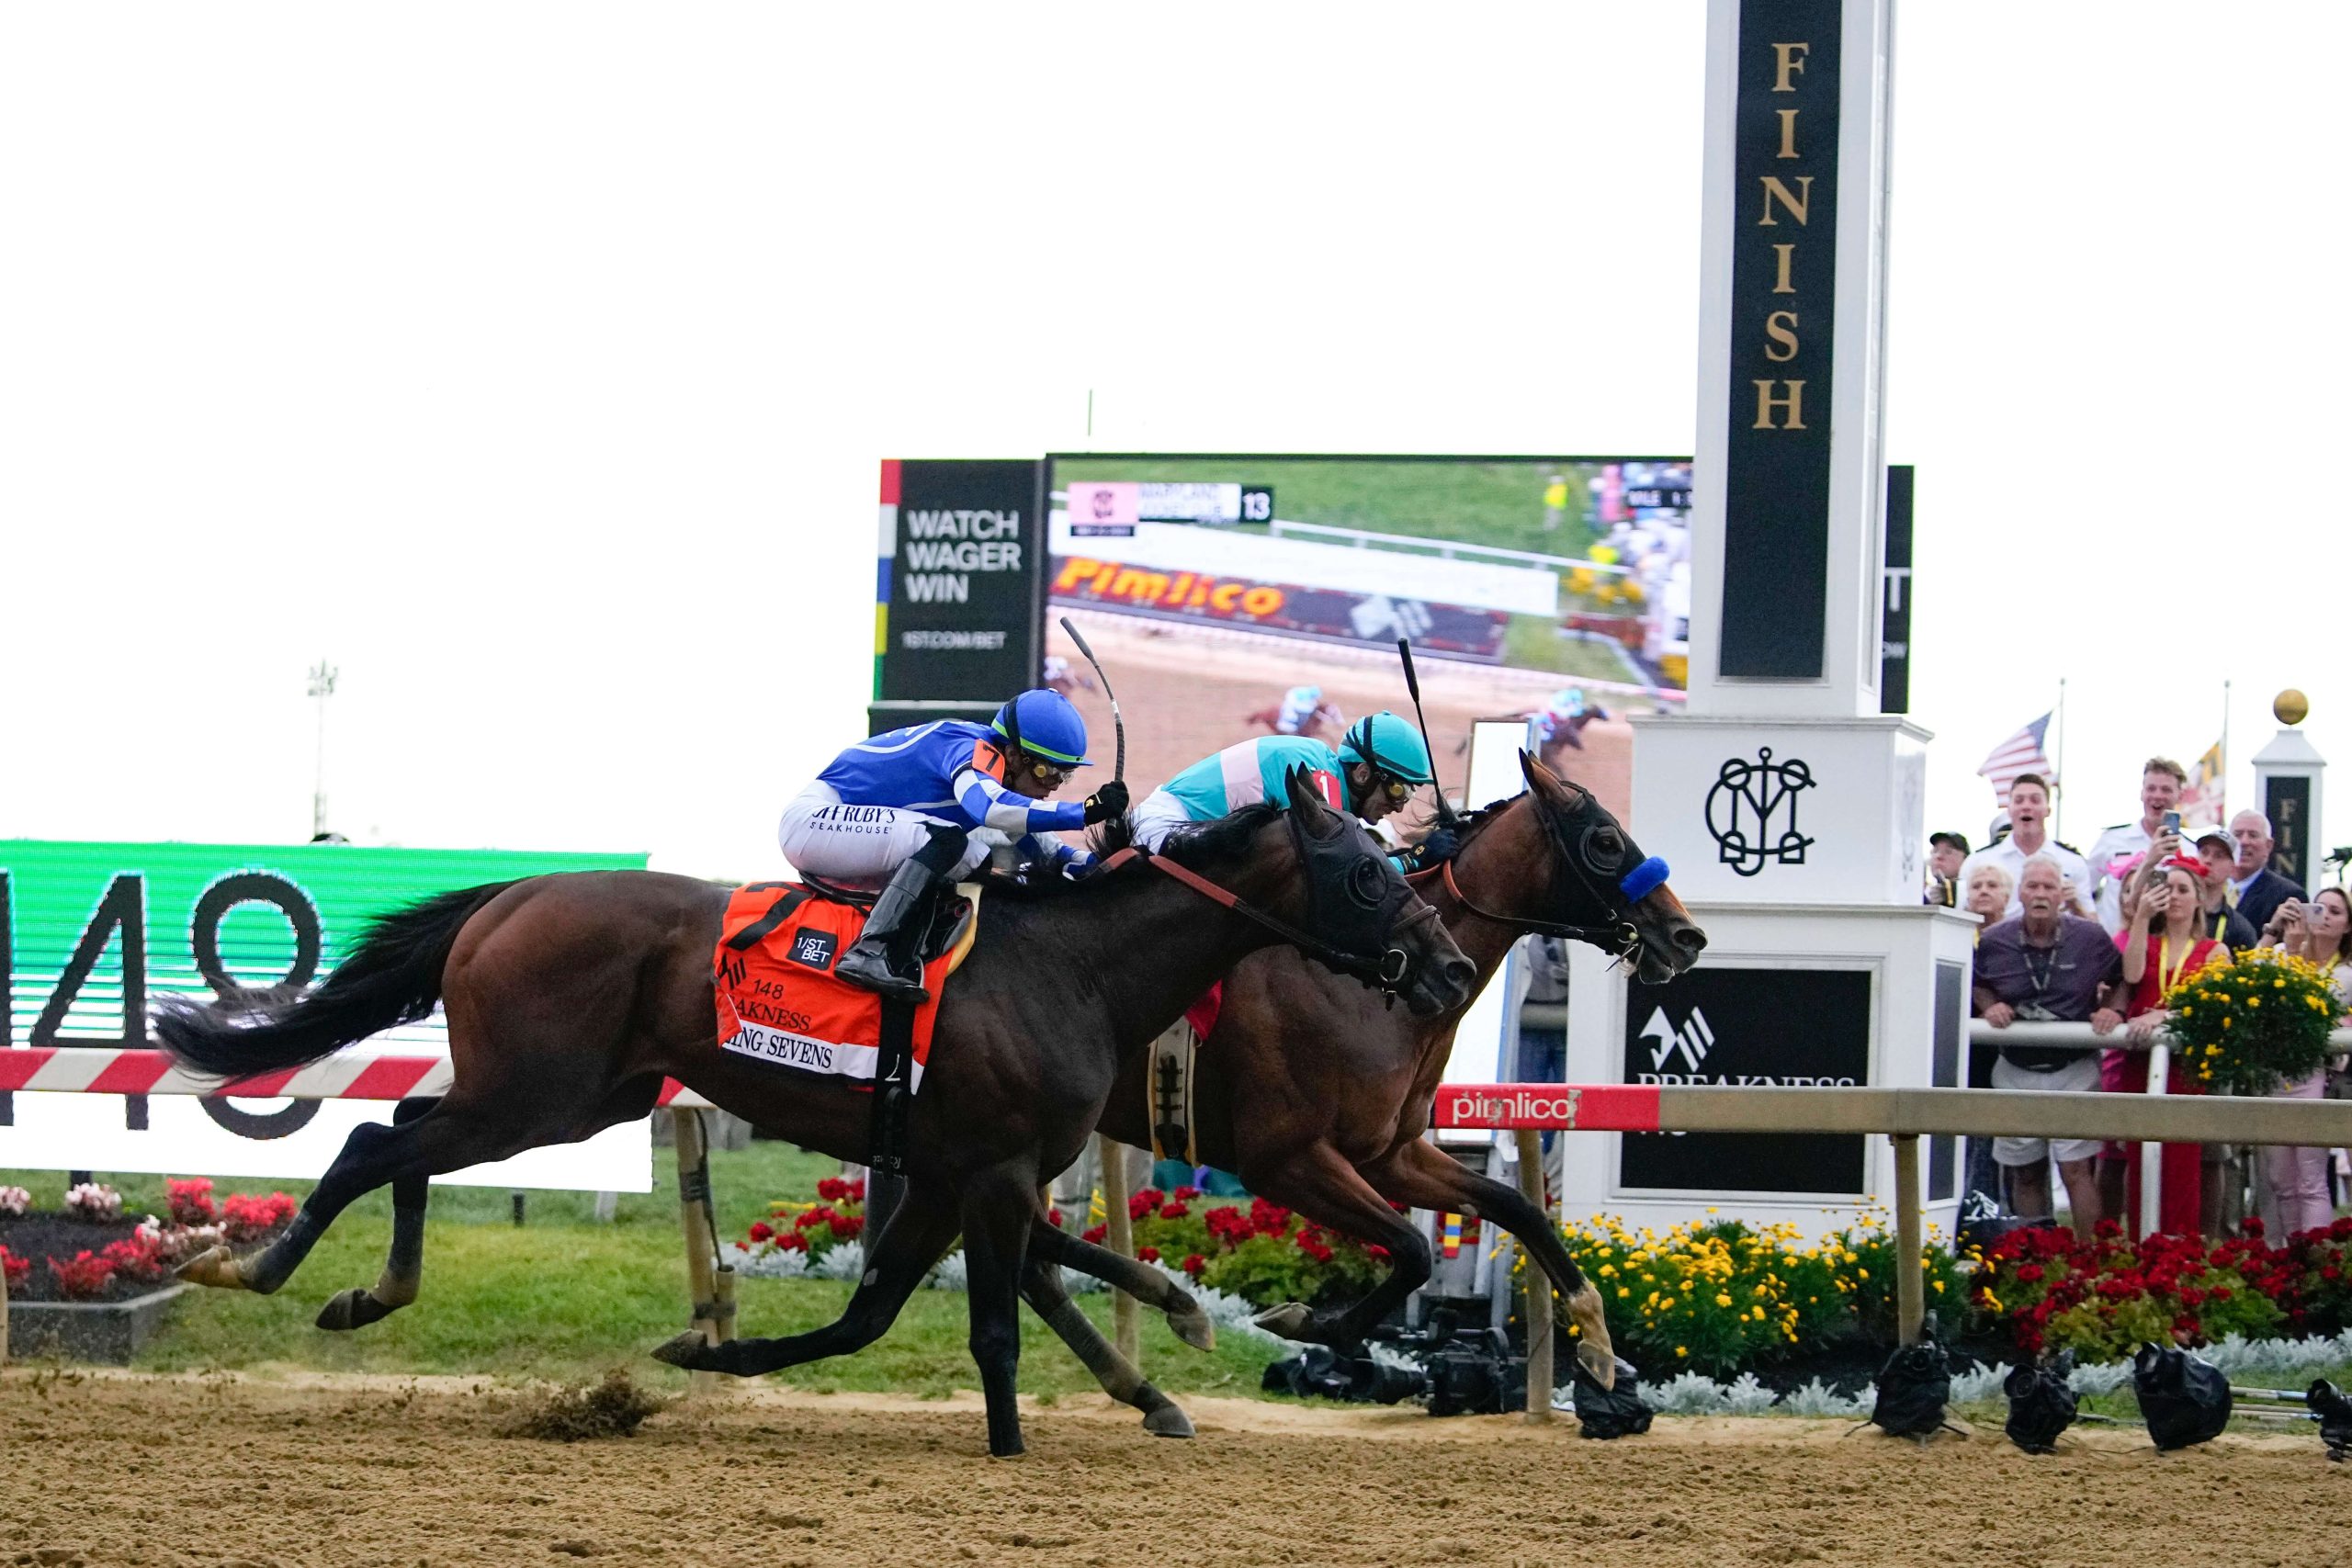 National Treasure Triumphs at Preakness Amidst Cloud of Horse Deaths